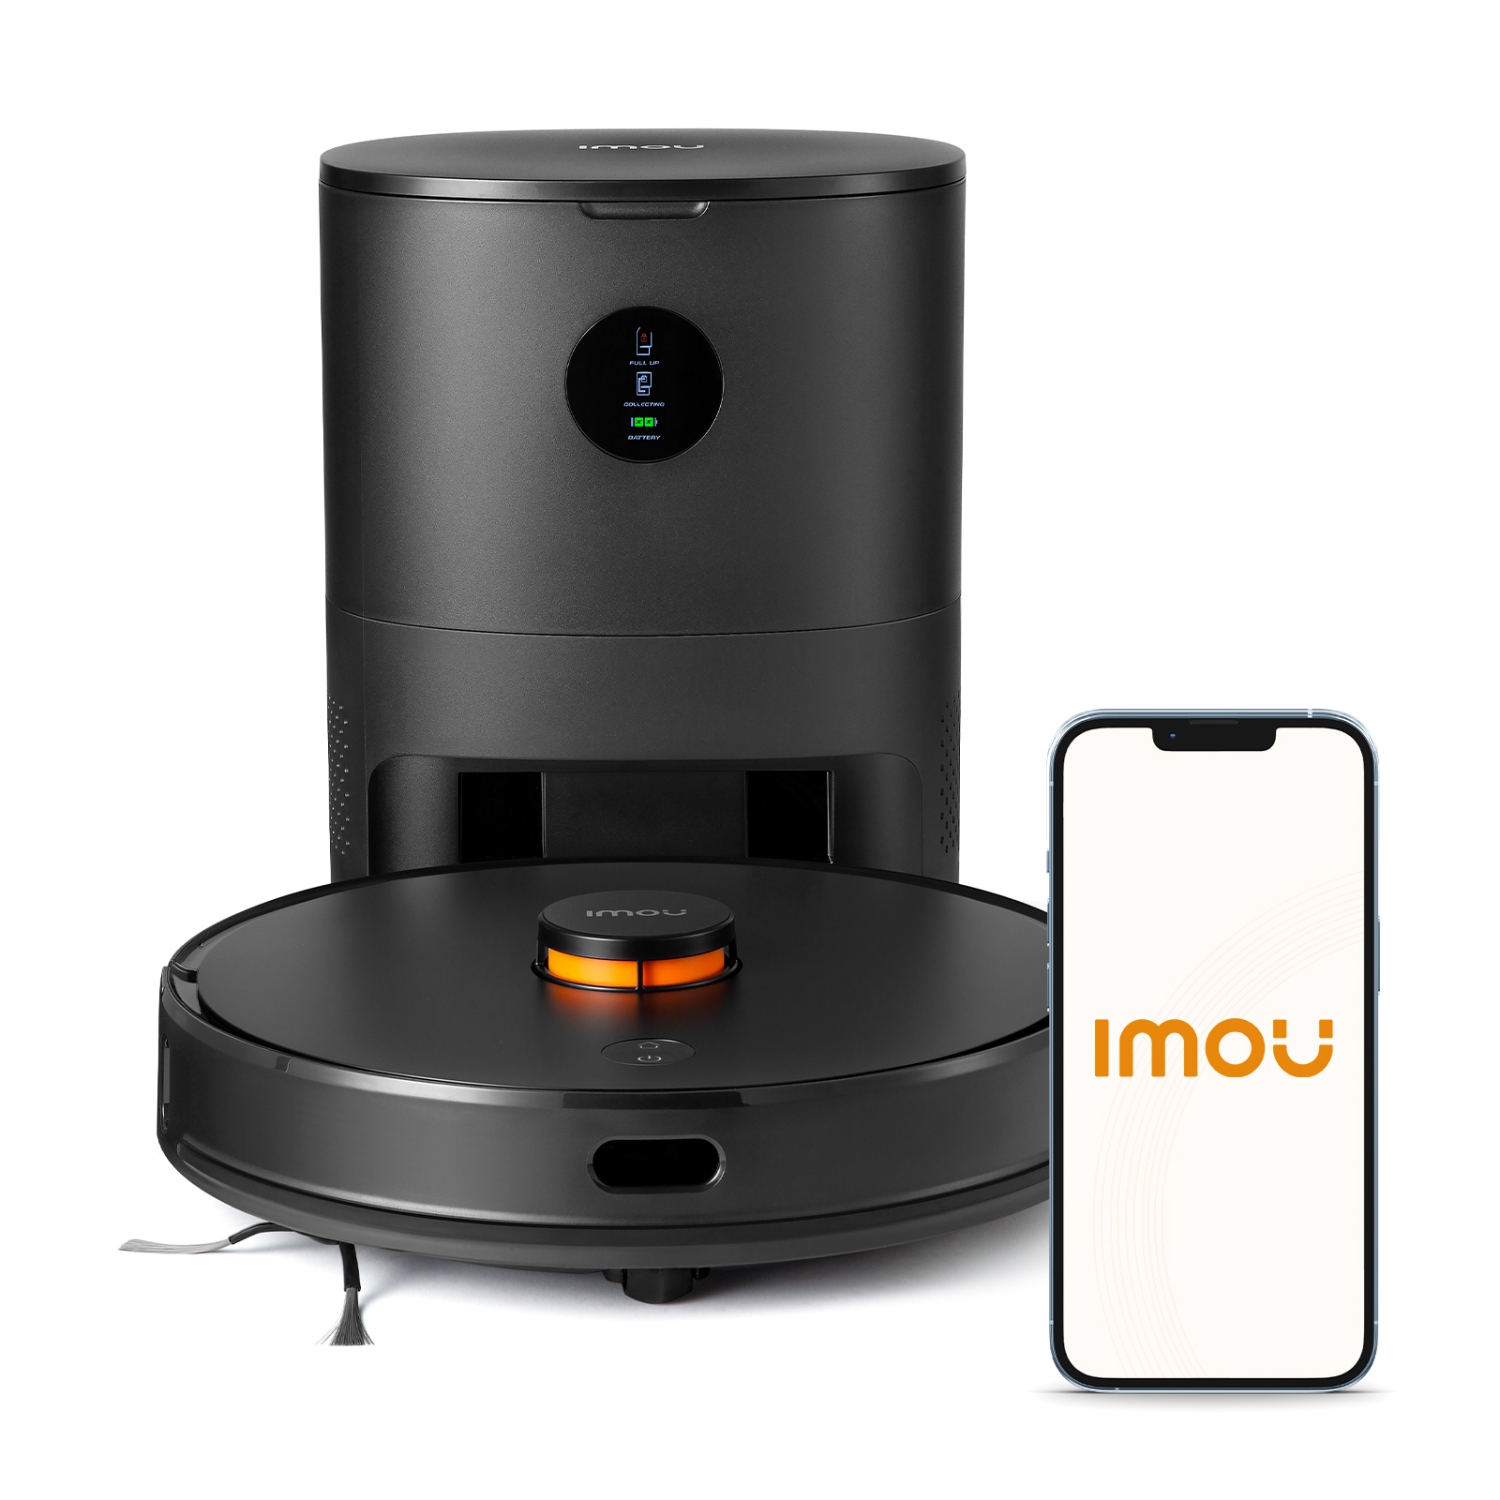 IMOU Robot Vacuum Cleaner with Auto Dirt Disposal, Self-Charging with Lidar Navigation Smart Mapping, WiFi, APP Control